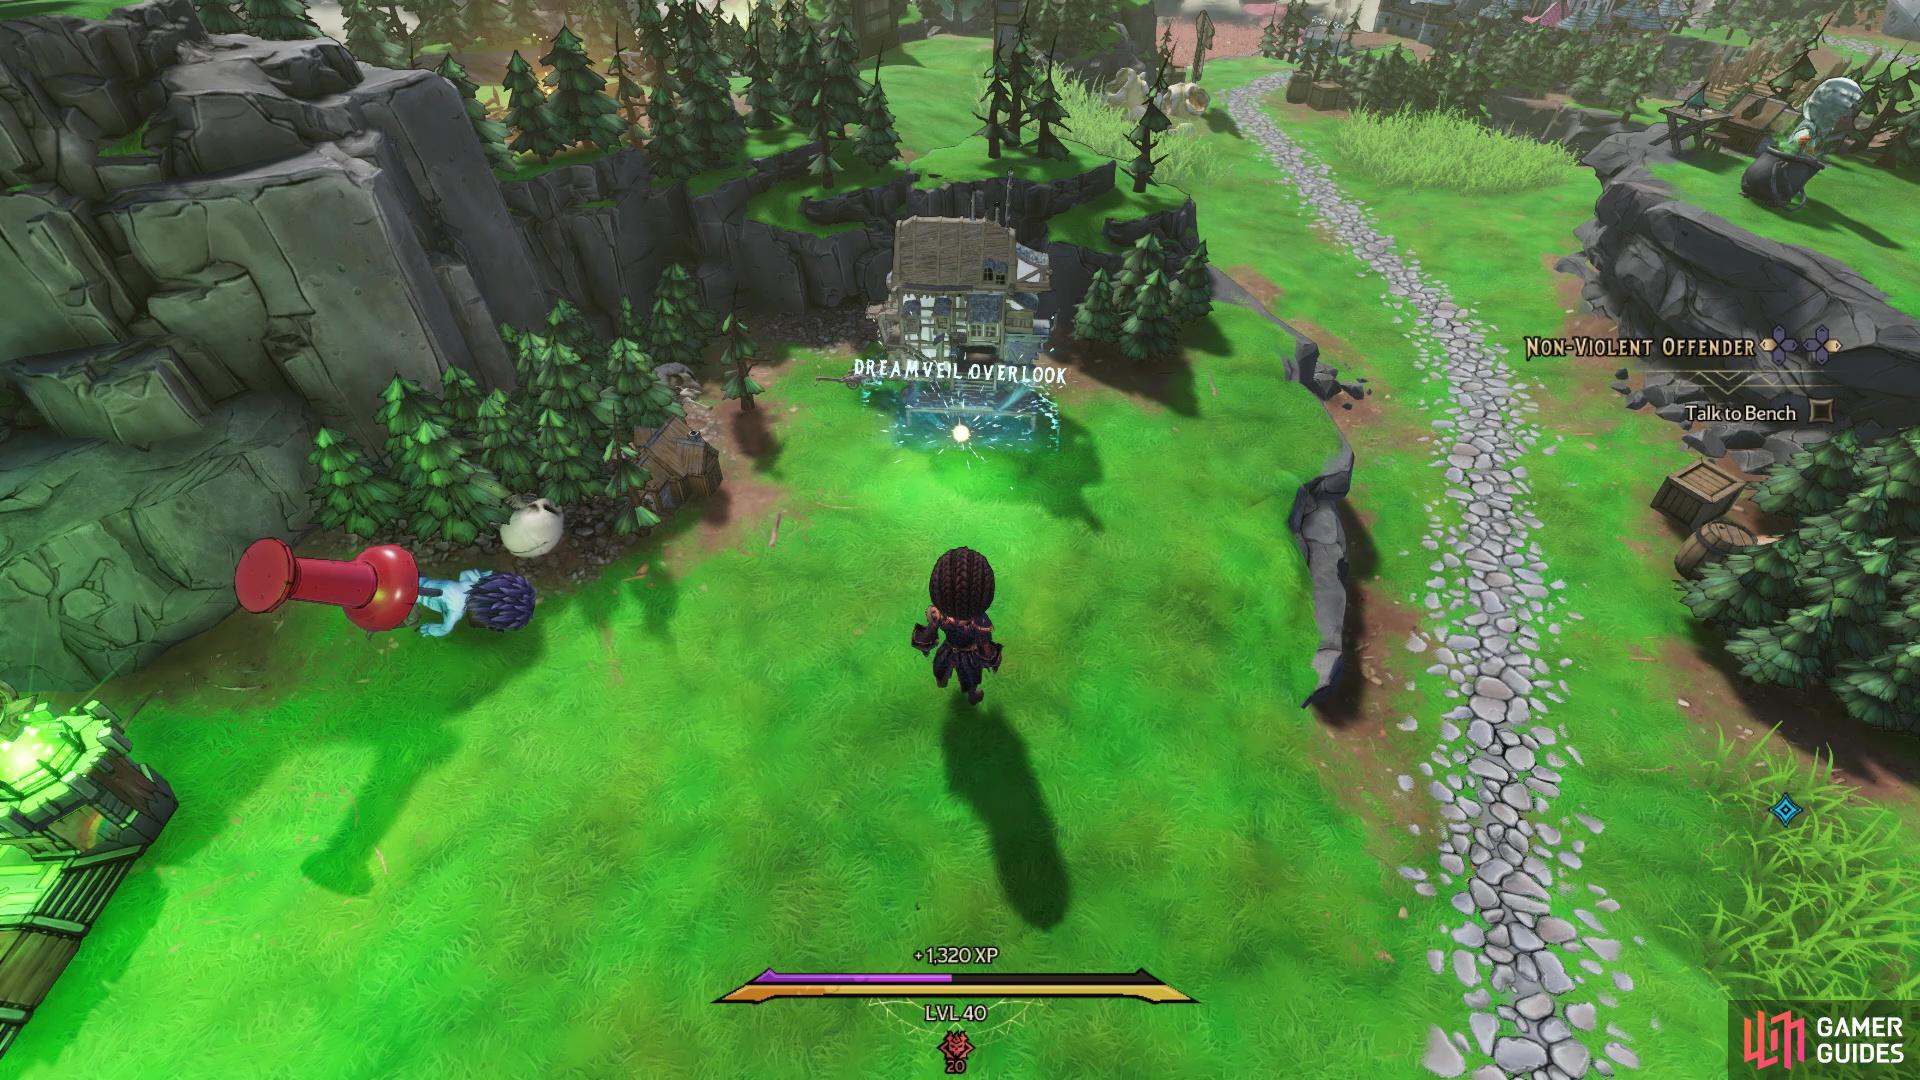 The portal leading to the DLC area doesn't appear on the actual Overworld map